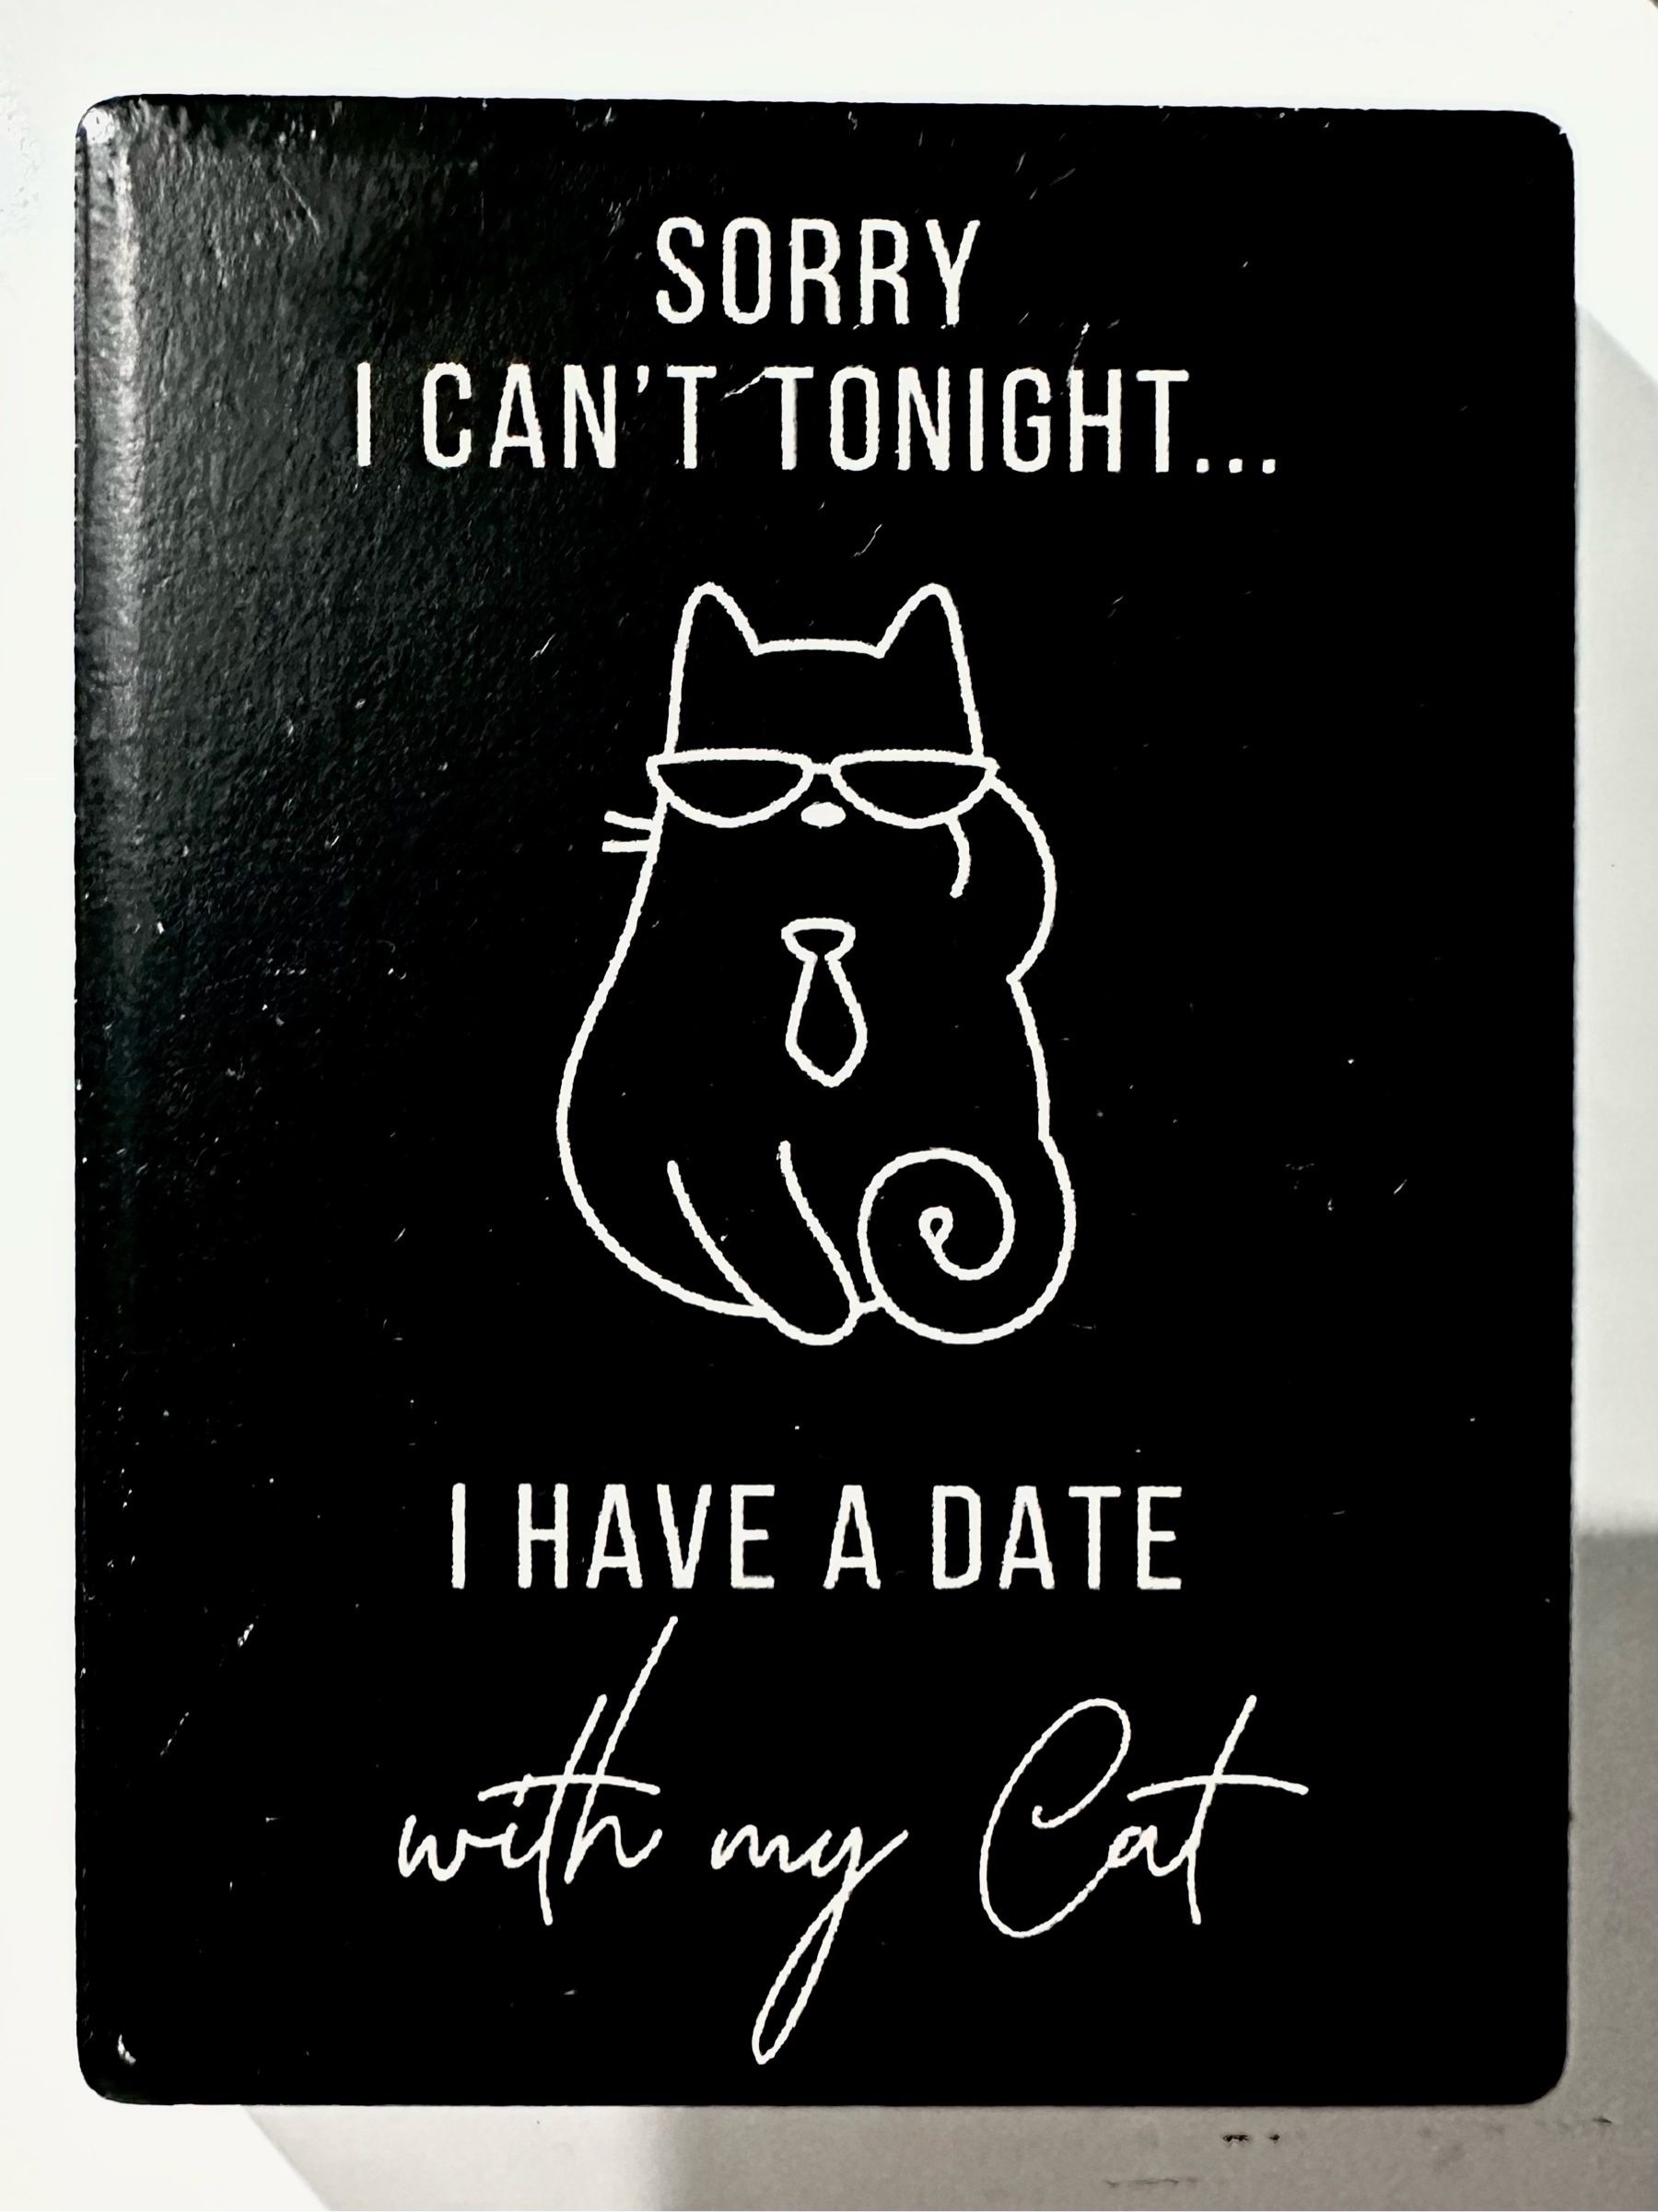 A black rectangular magnet. In white writing from top to bottom it says "Sorry I can't tonight, then an outline of a cat wearing sunglasses, I have a date with my cat”.